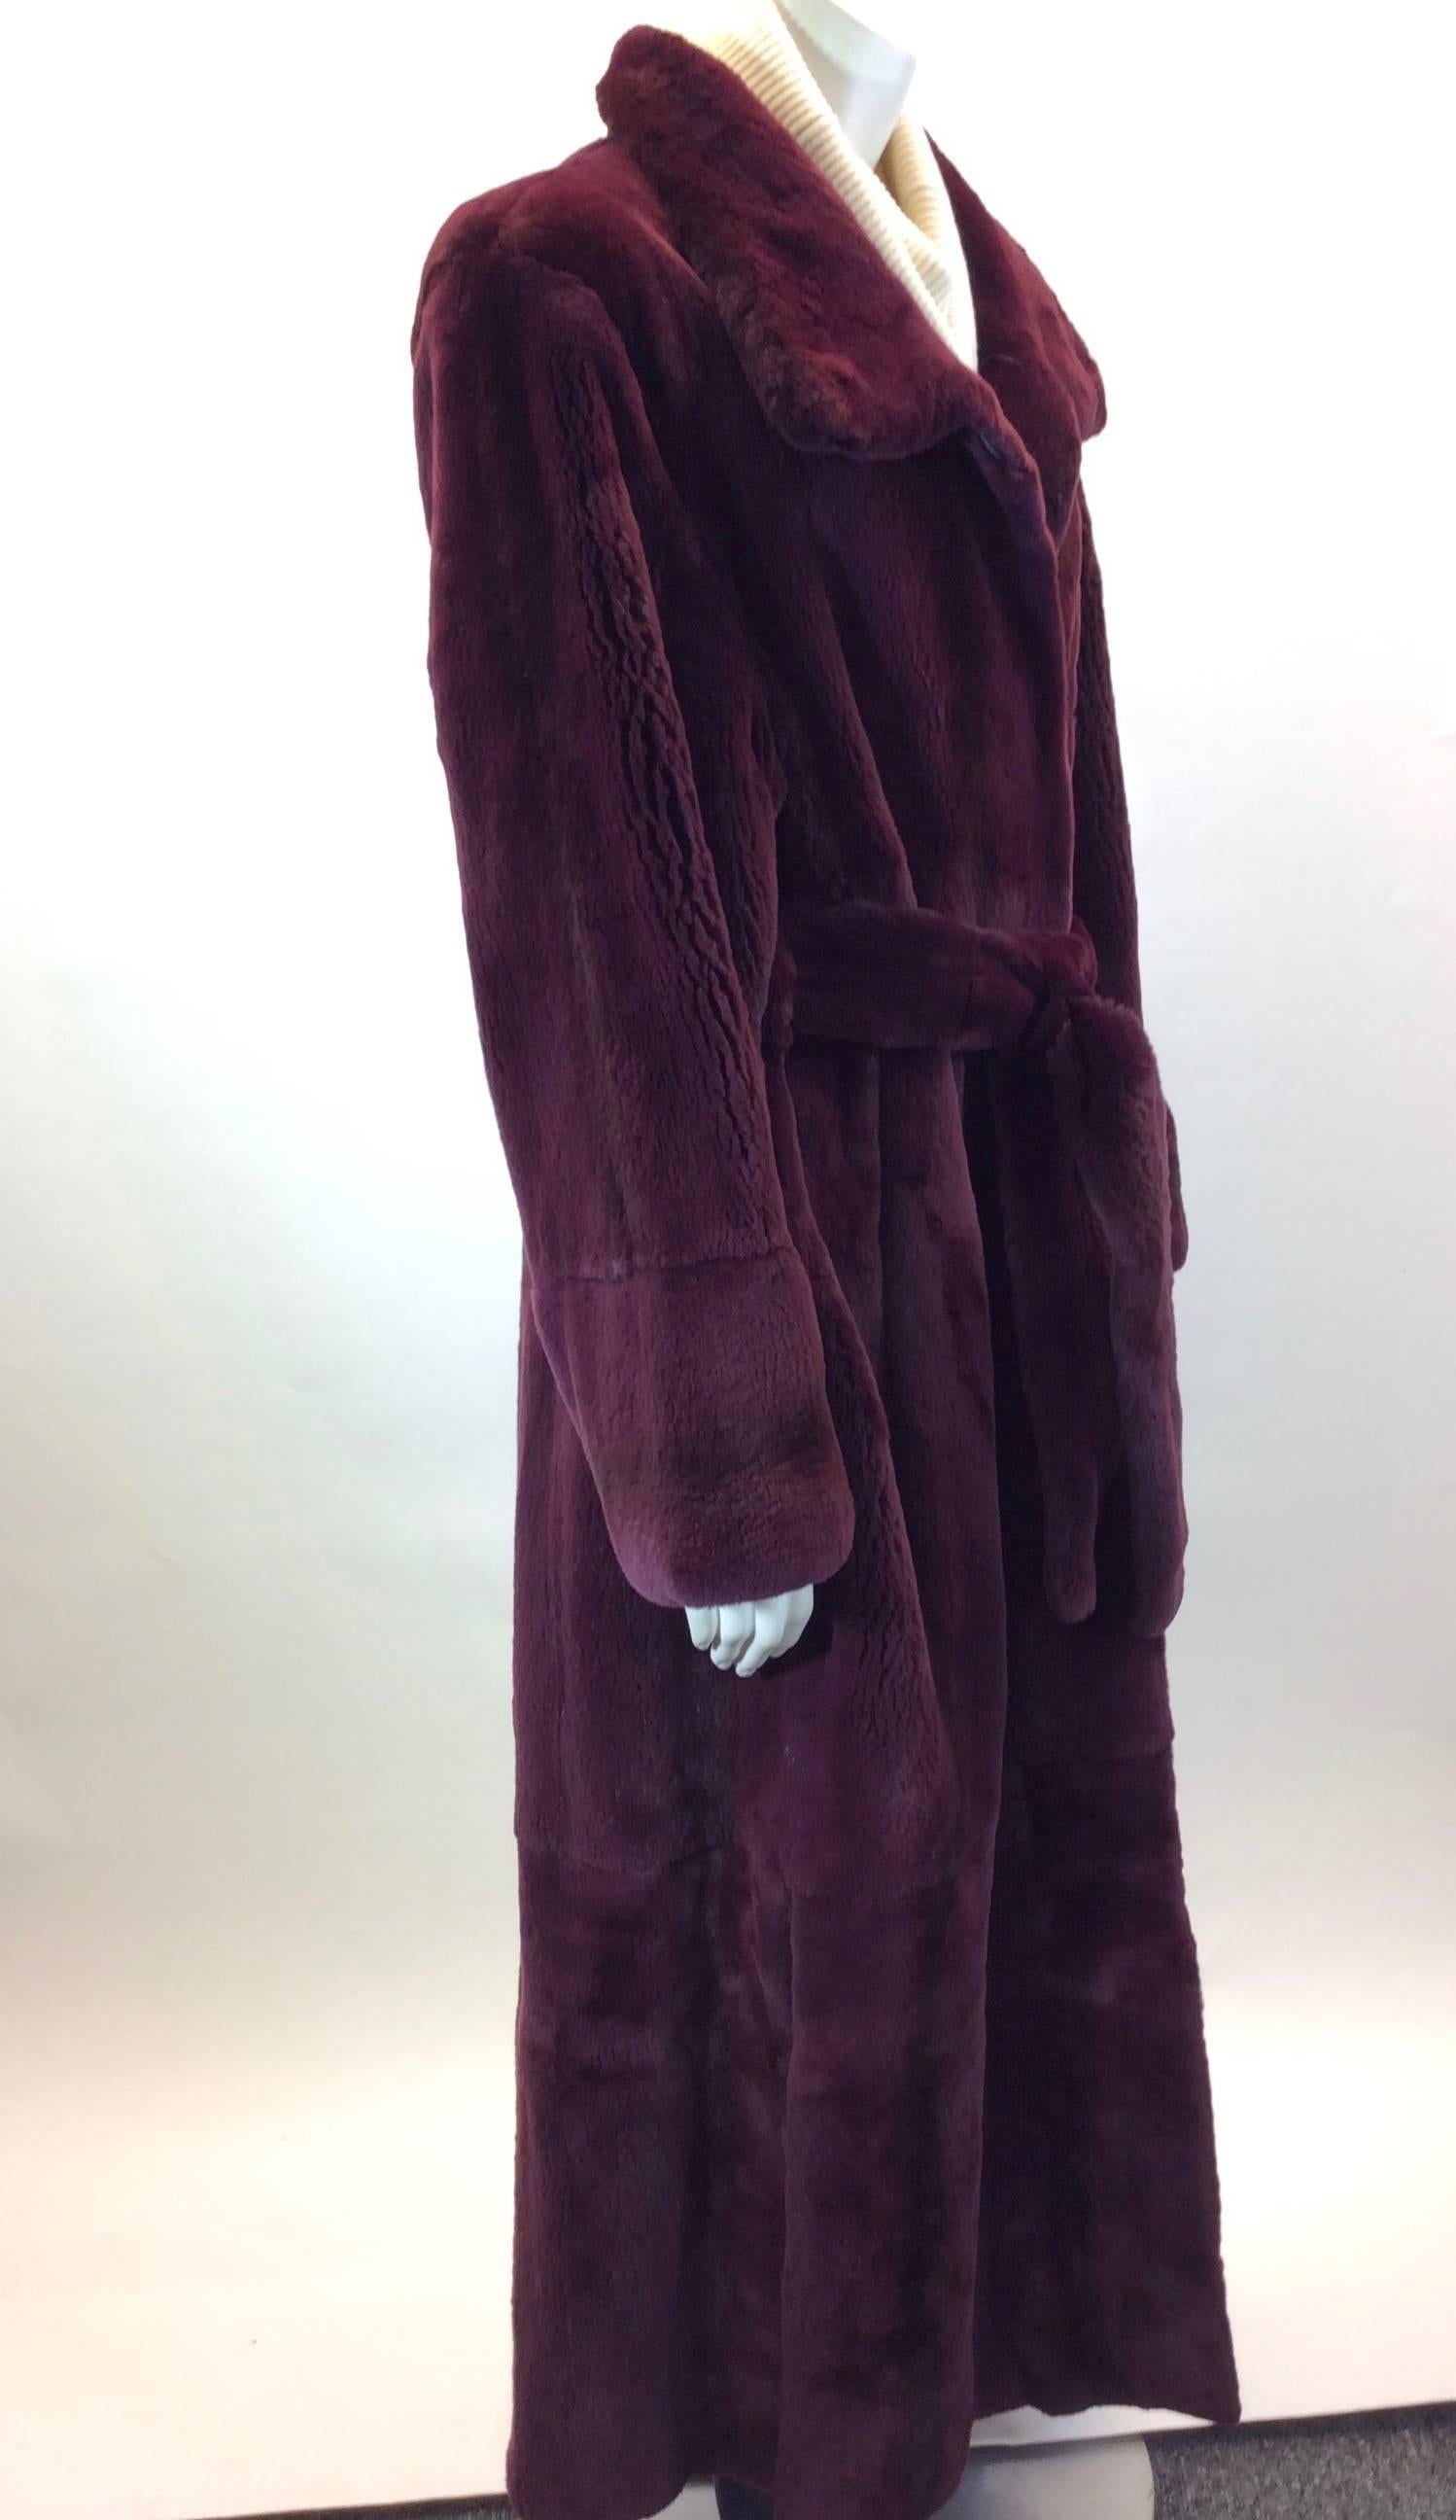 Burgundy Dyed Fur 
Sheared Mink 
Adjustable Wrap Belt 
Latches on front for Closure 
Two buttons near collar
Slits on bottom of Coat 
22” Inch Sleeve Length
New/Original Price: $13,500